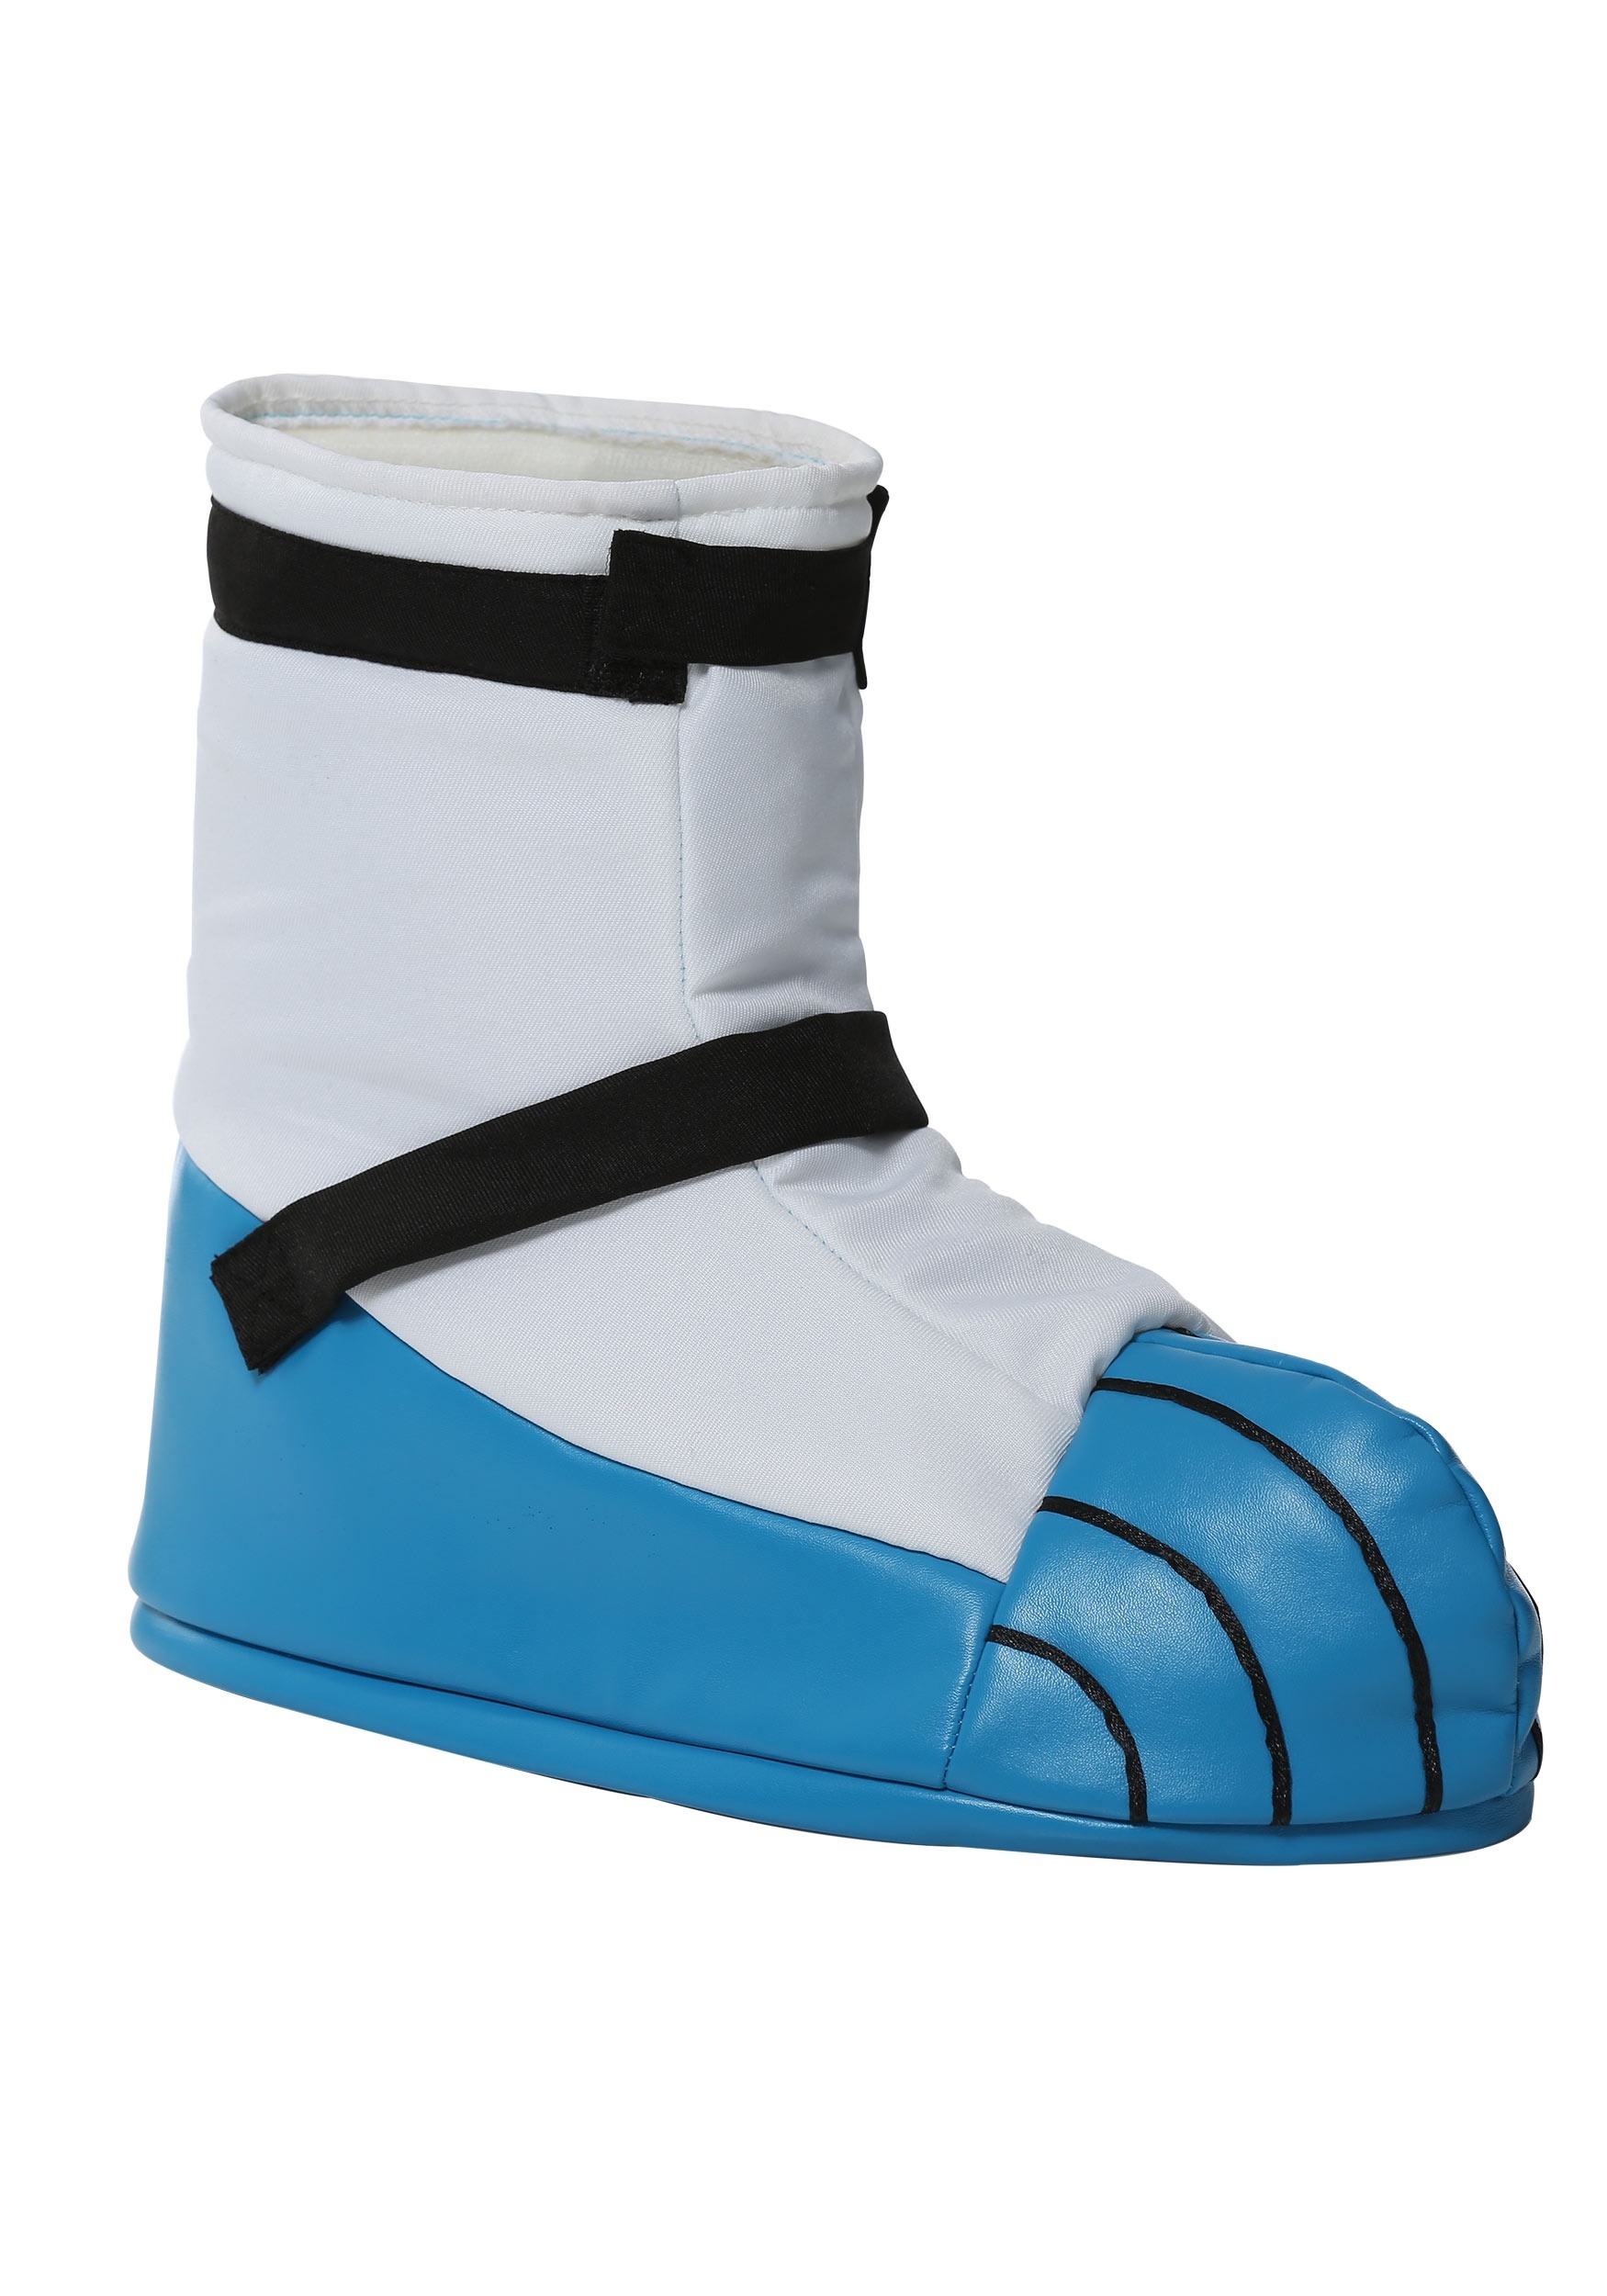 Strapped Astronaut Boot Covers